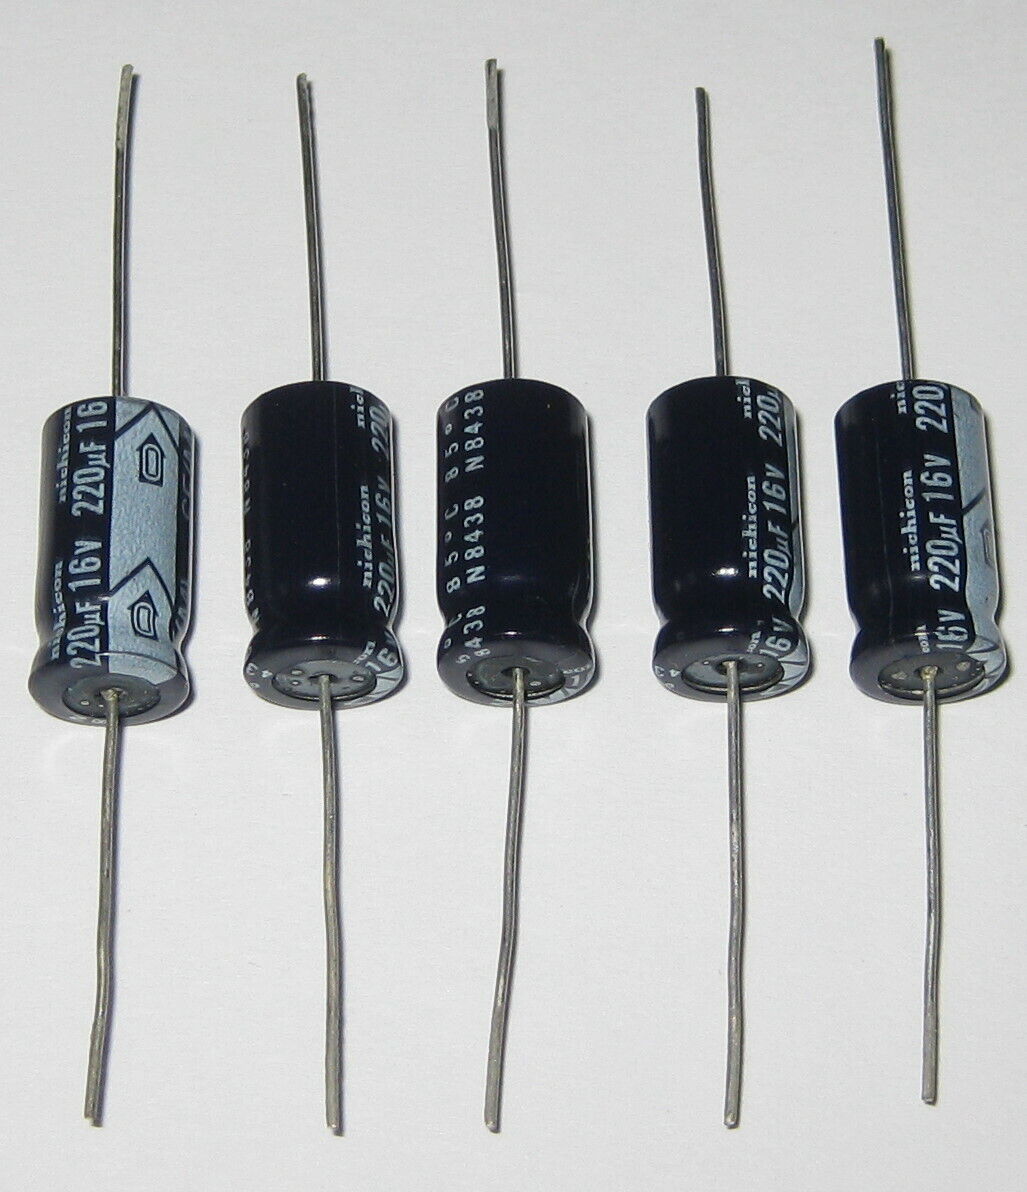 5 X Nichicon 220 uF Axial Electrolytic Capacitor - 16 V DC - 8 mm Diameter  85C 